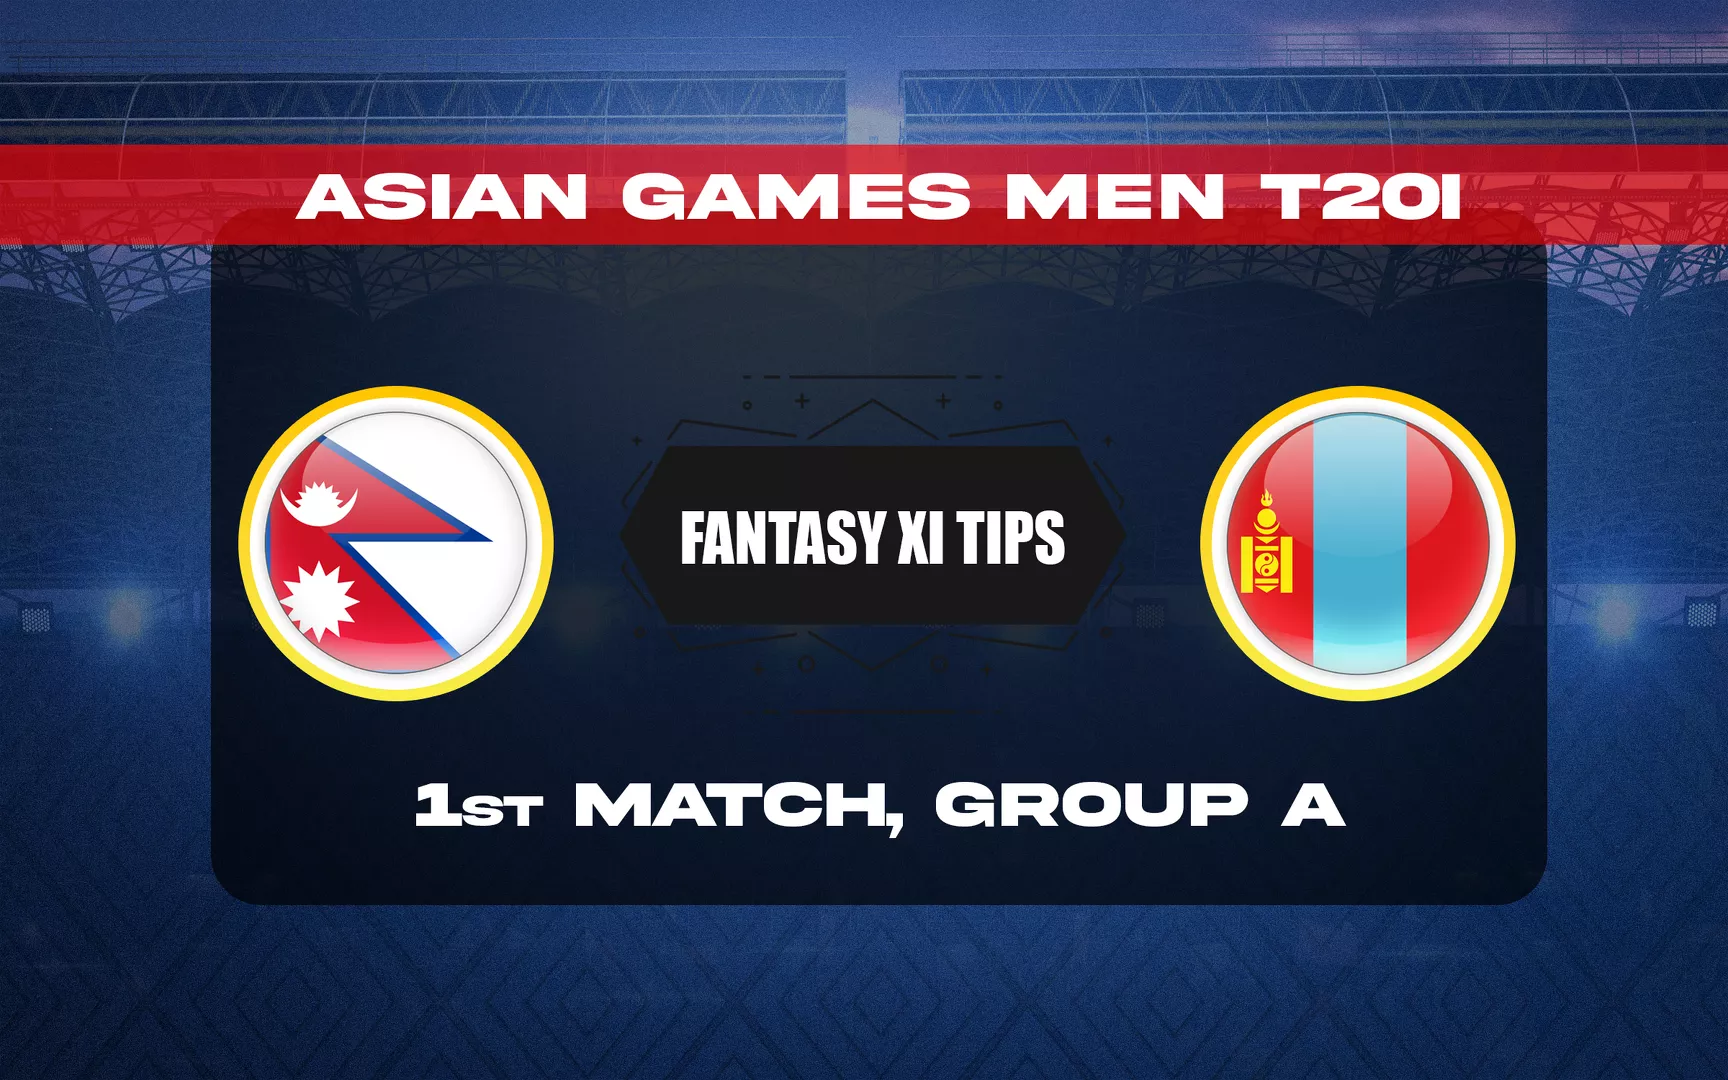 NEP vs MON Dream11 Prediction, Dream11 Playing XI, Today 1st Match, Group A, Asian Games Men T20I